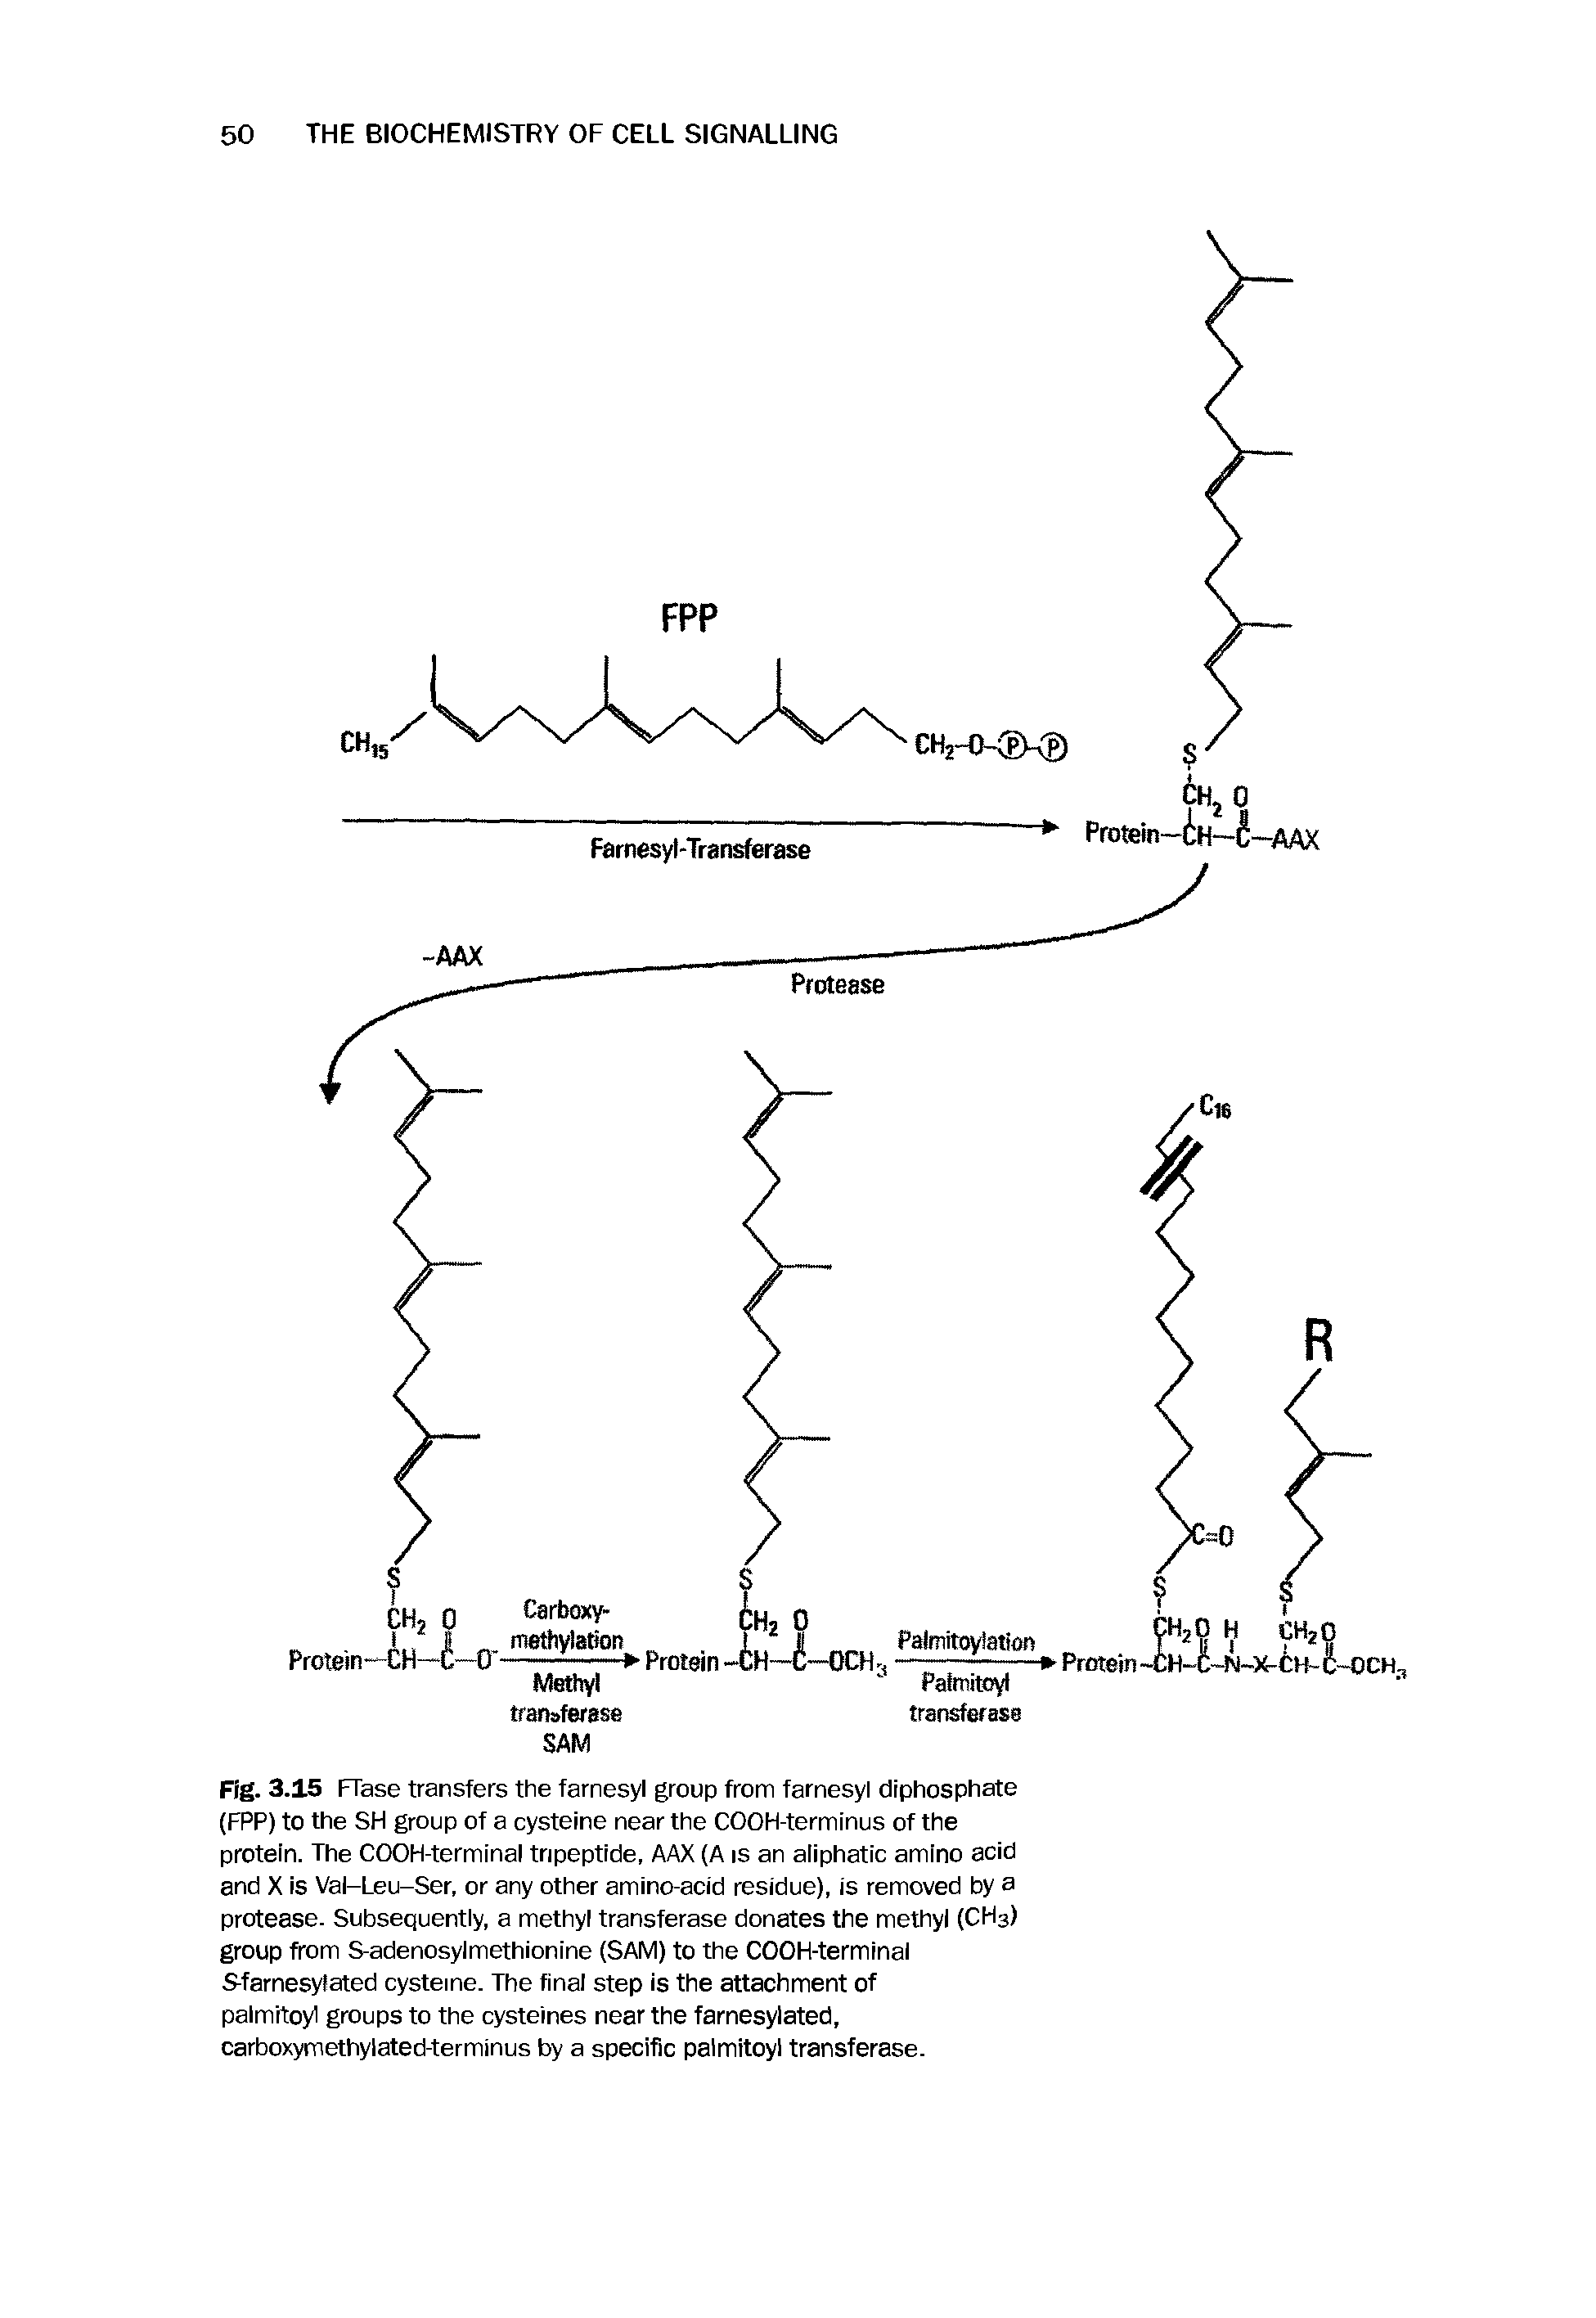 Fig. 3.15 FTase transfers the farnesyl group from farnesyl diphosphate (FPP) to the SH group of a cysteine near the COOH-terminus of the protein. The COOH-terminal tripeptide, AAX (A is an aliphatic amino acid and X is Val-Leu-Ser, or any other amino-acid residue), is removed by a protease. Subsequently, a methyl transferase donates the methyl (CH3) group from S-adenosylmethionine (SAM) to the COOH-terminal Sfarnesylated cysteine. The final step is the attachment of palmrtoyl groups to the cysteines near the farnesylated, carboxymethylated-terminus by a specific palmitoyl transferase.